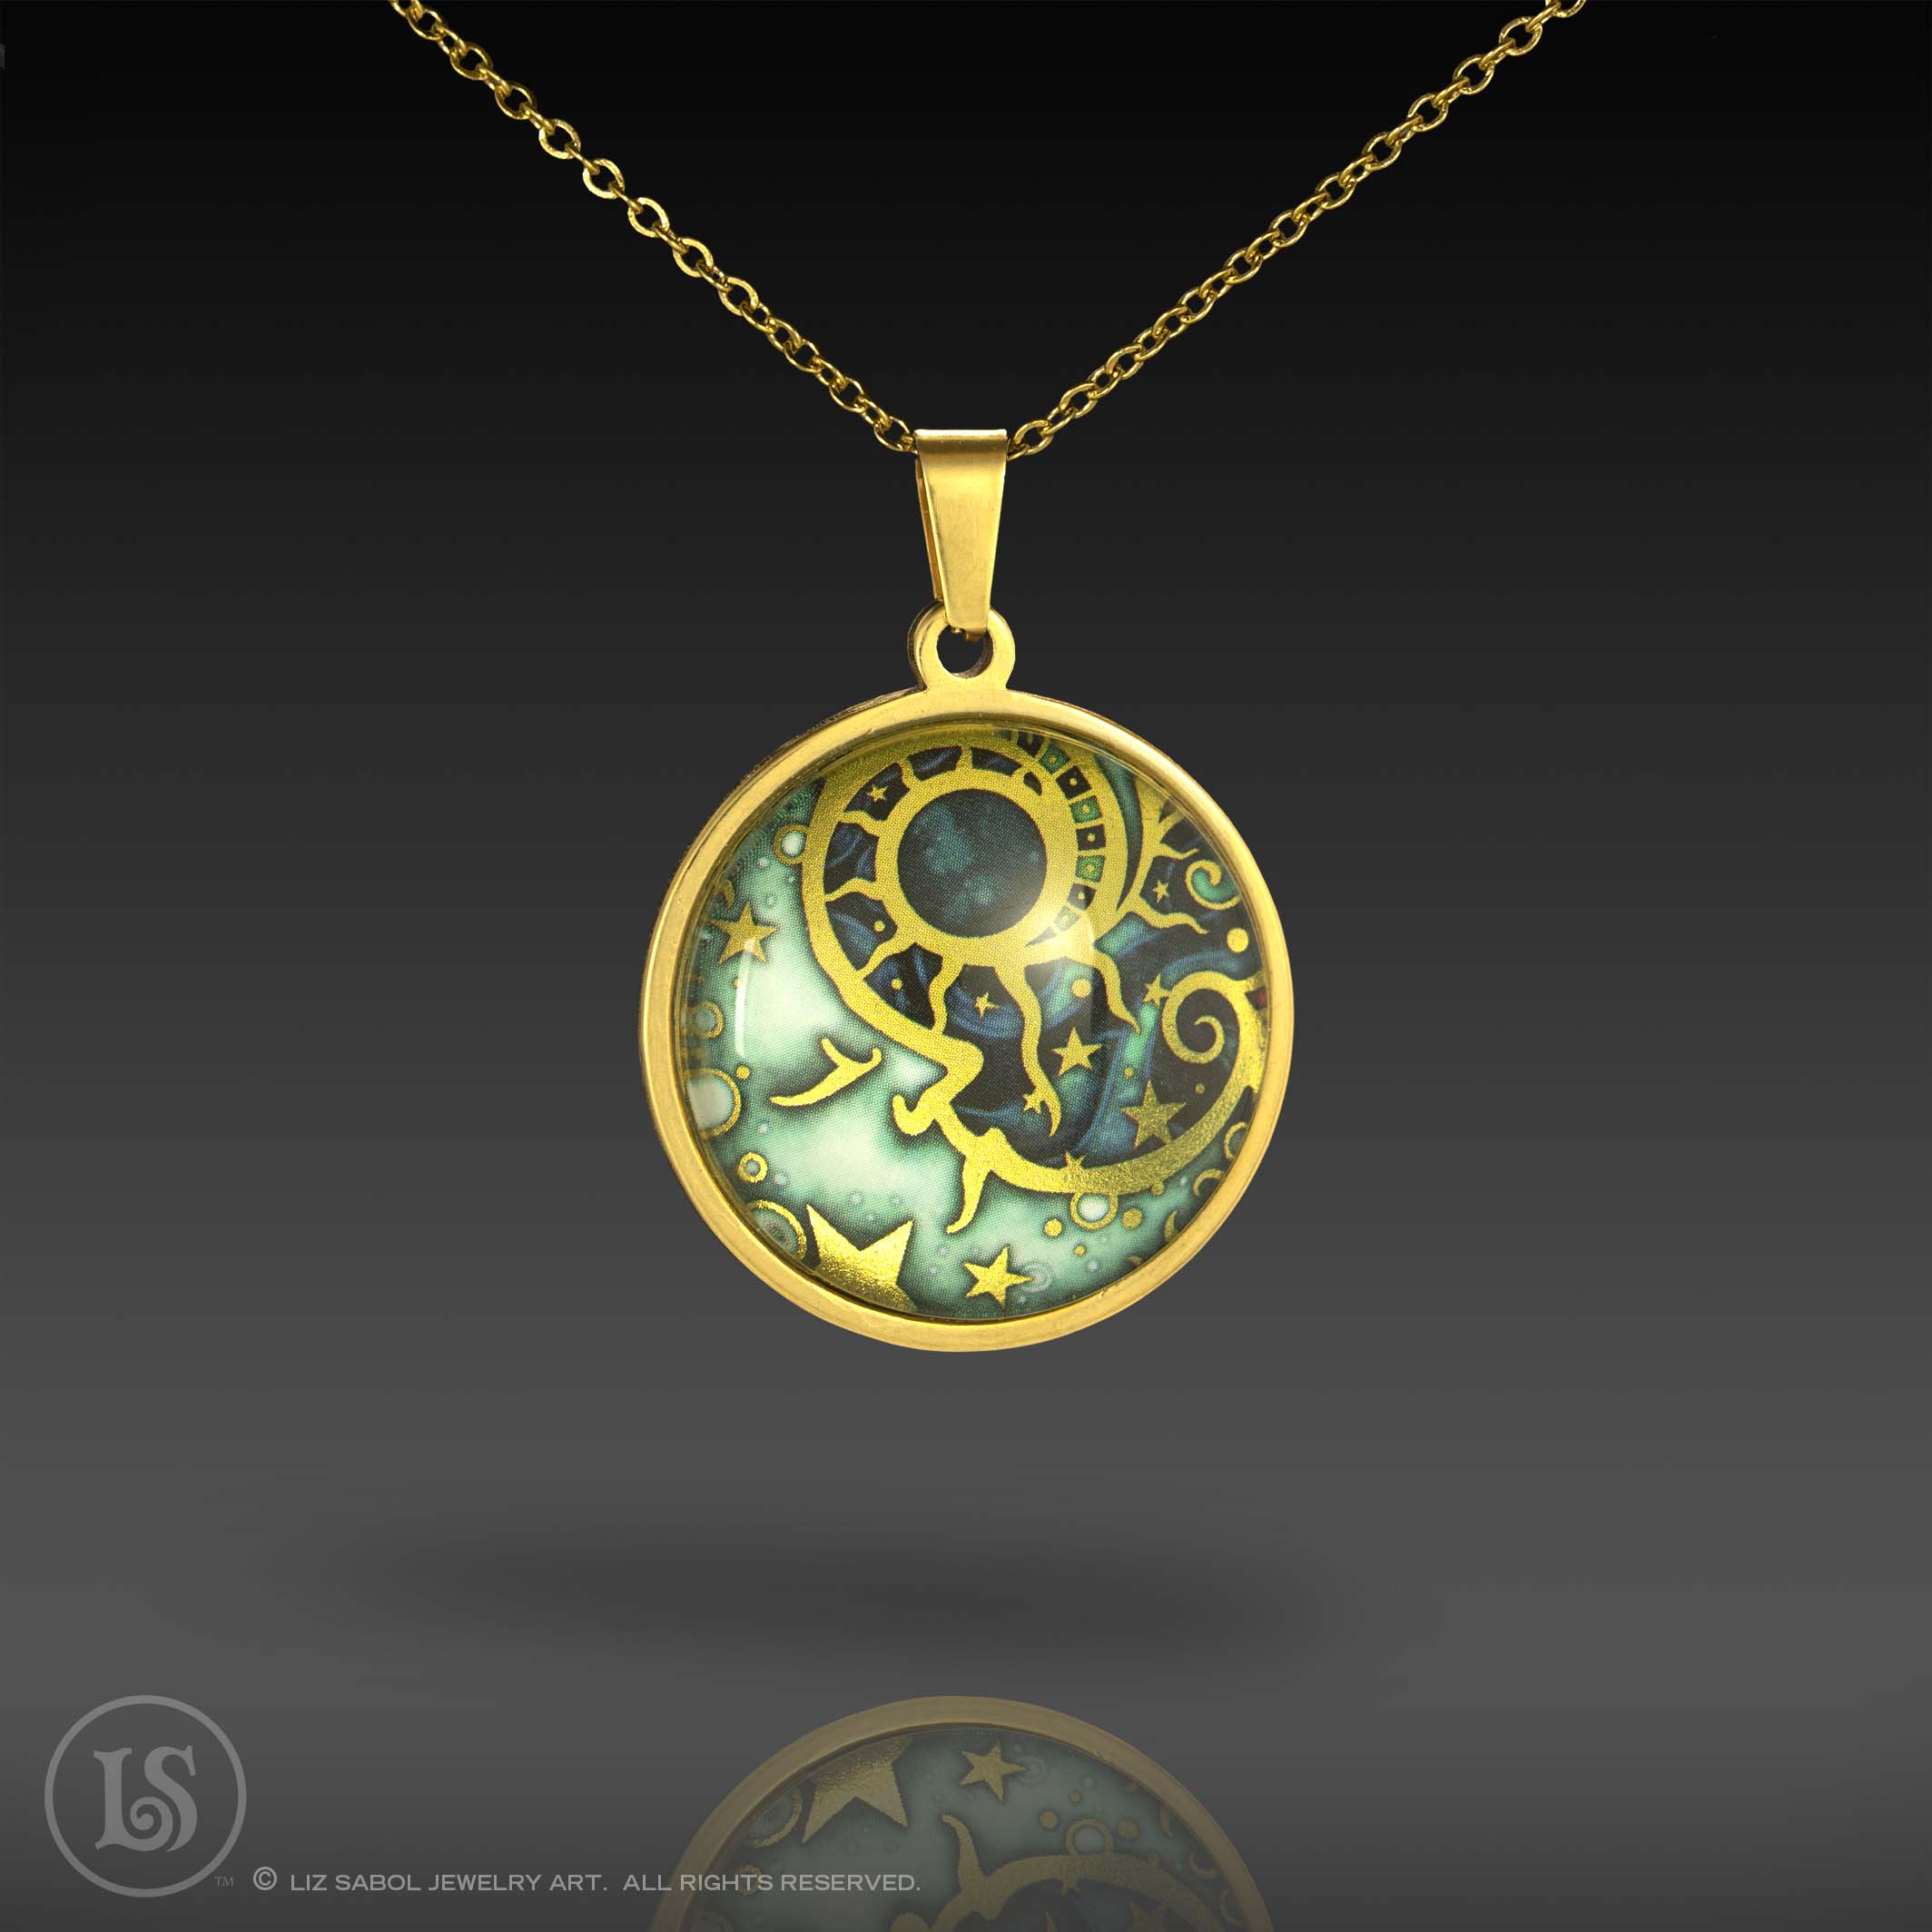 Man in the Moon Pendant, Glass, Gold-plated Stainless Steel